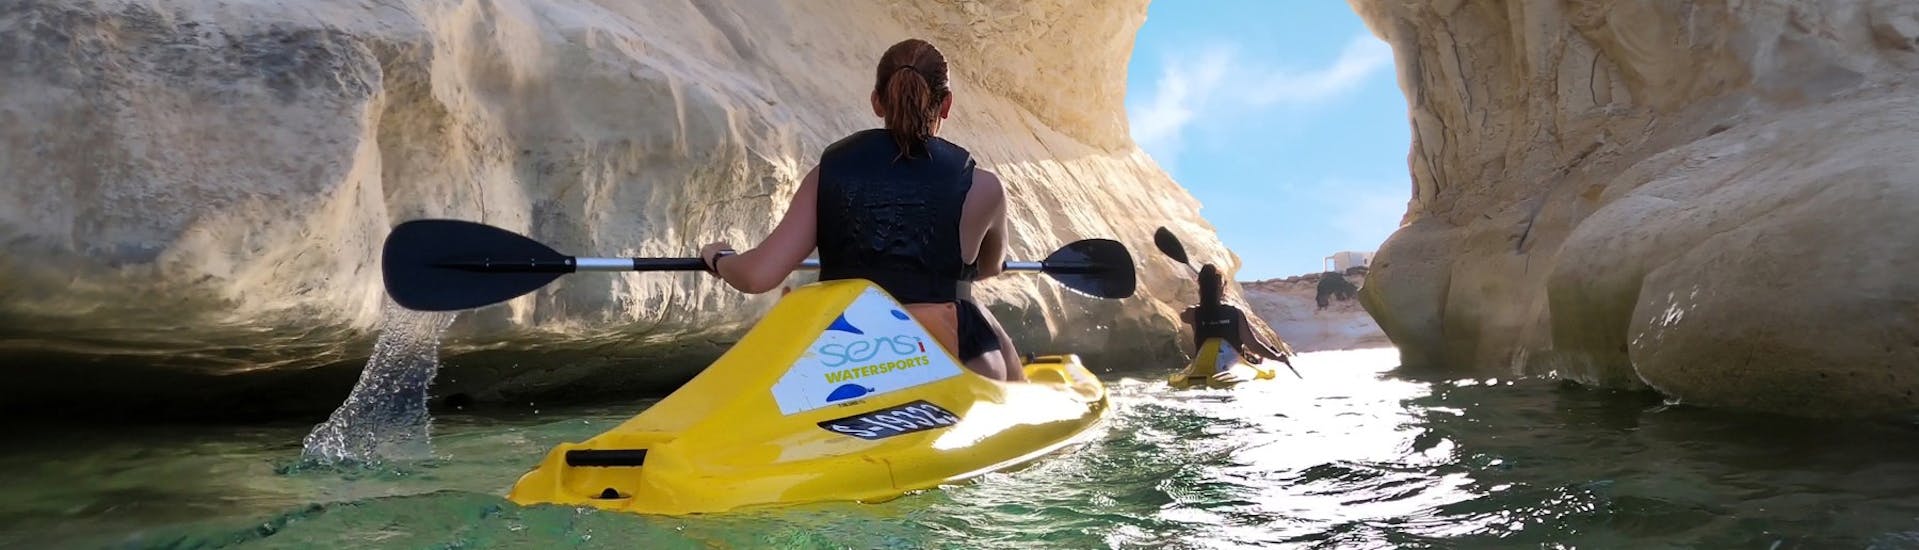 Two people on the water during the Guided Sunset Kayak Tour with Sensi Watersports Malta.